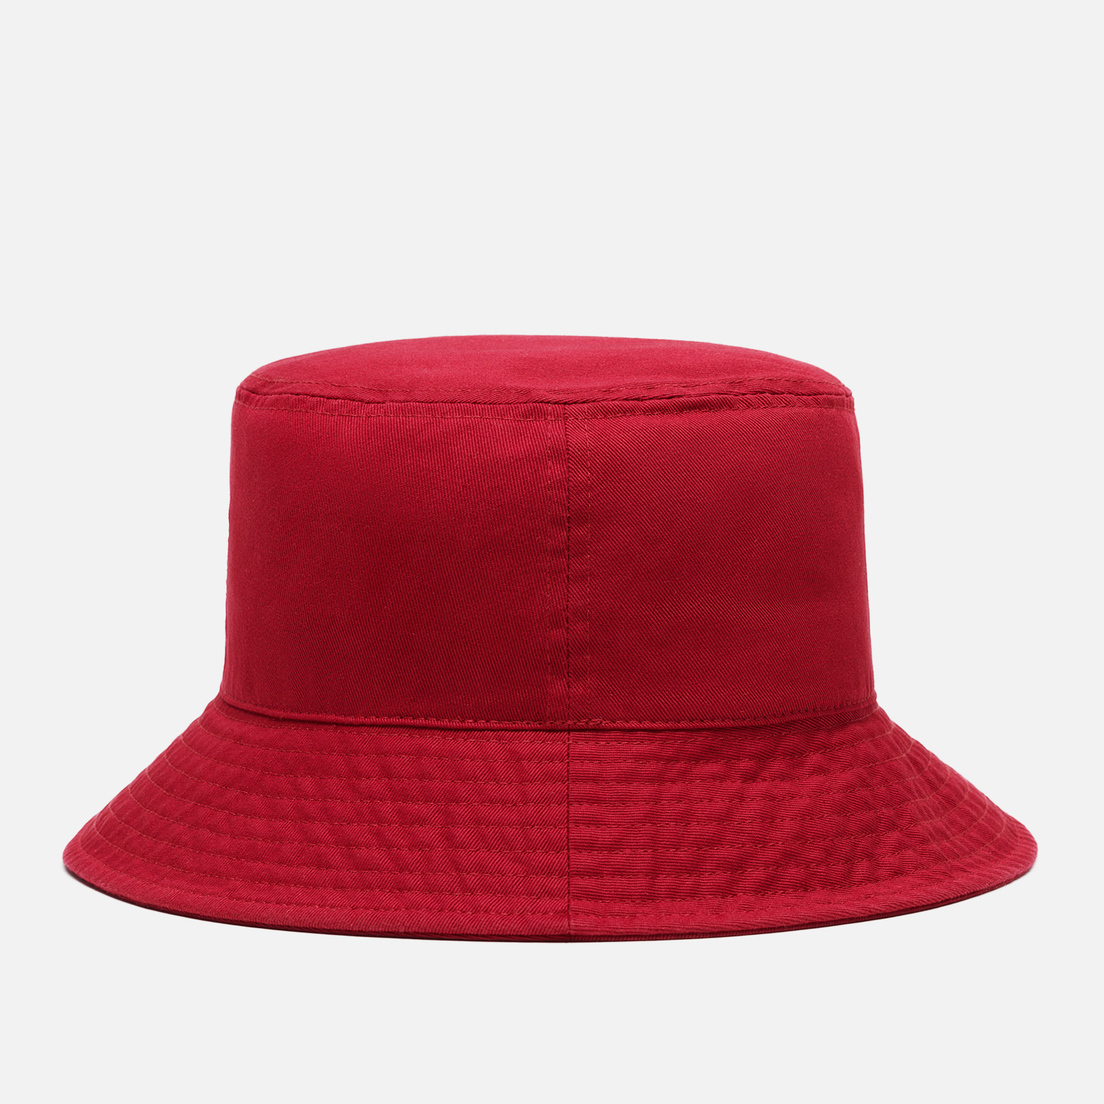 Kangol Панама Washed